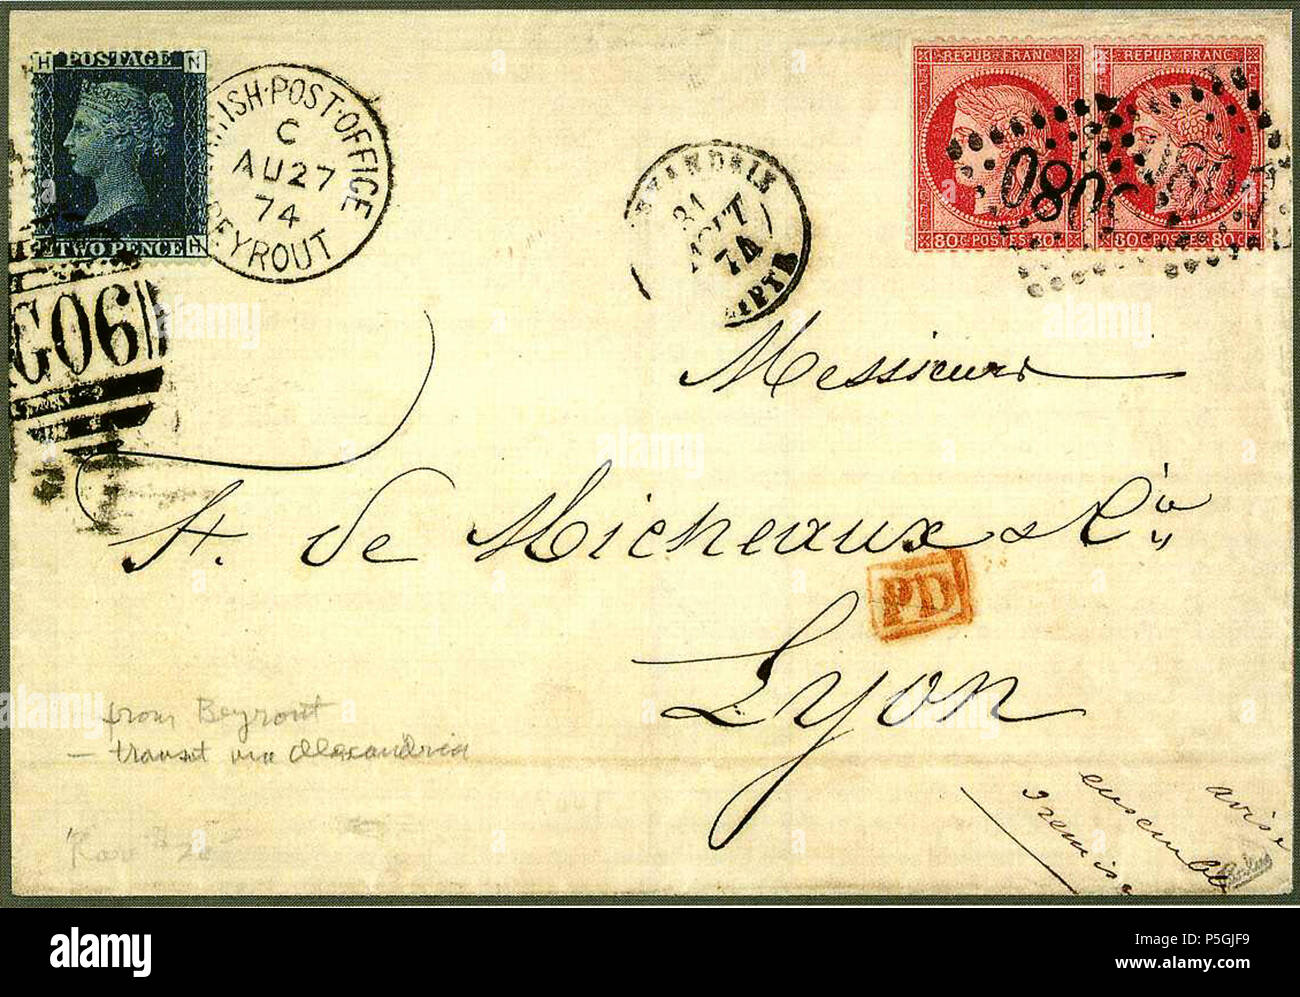 N/A. English: Cover from British-Post-Office BEYROUT to Lyon with 2 pence (Gibbons 14) & France 50 c carmine pair tied 5080 at Alexandrie Egypte. Lot 2696 sold 9,000 SF in 2000 (Cihangir collection). August 1874. 27 August 1874 (scan 2017-09-21 00:10:11). BPO in the Levant 30 1874 2p G06&amp;BPO Beyrout 80cpair 5080 G14 Stock Photo